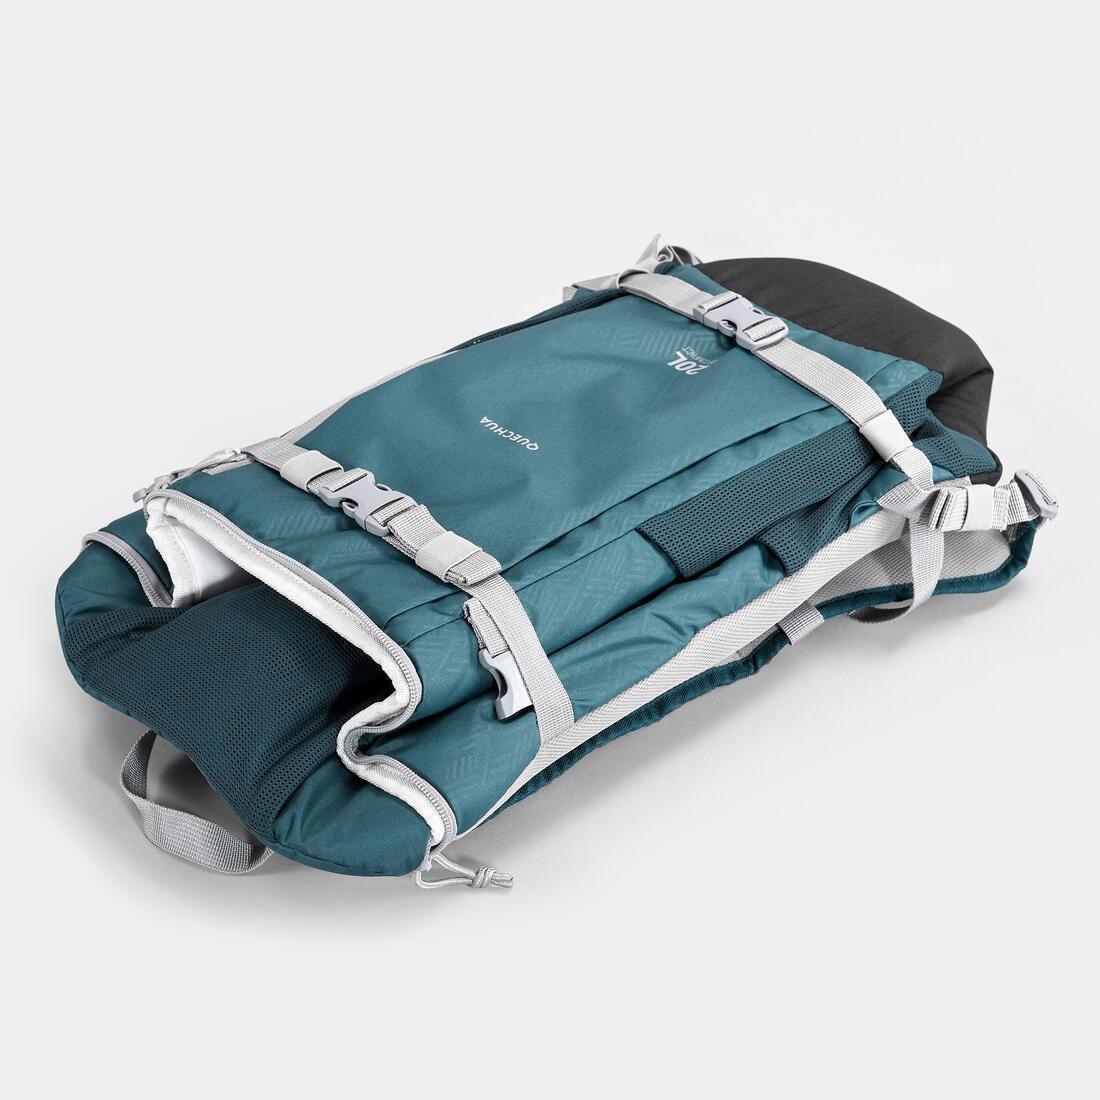 QUECHUA - Isothermal Backpack 10 L - NH Ice Compact 100, Verdigris